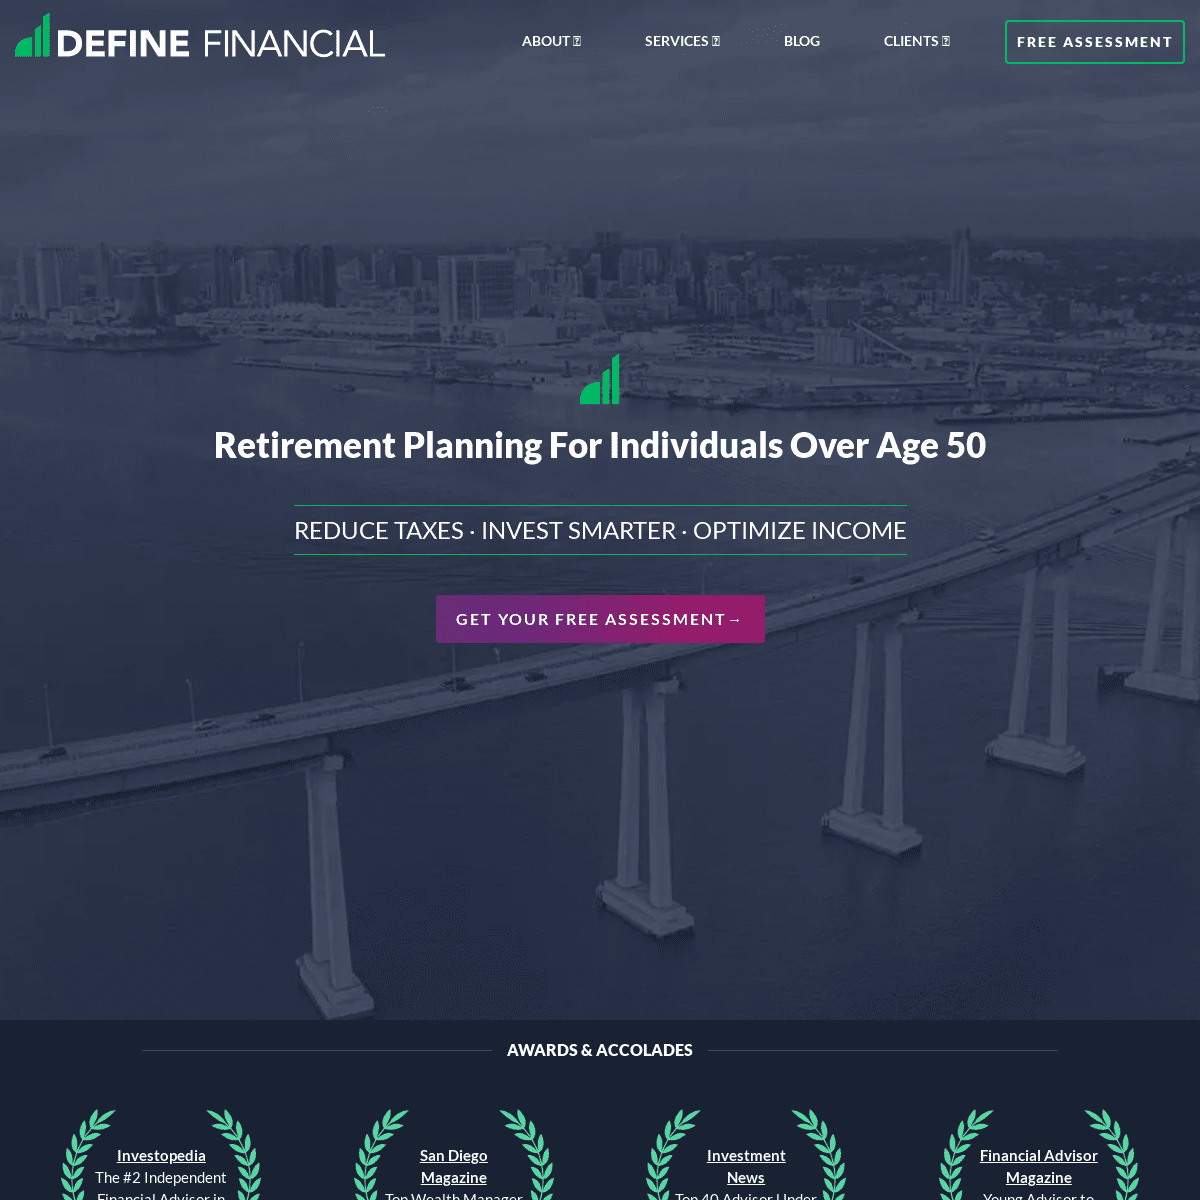 A complete backup of https://definefinancial.com